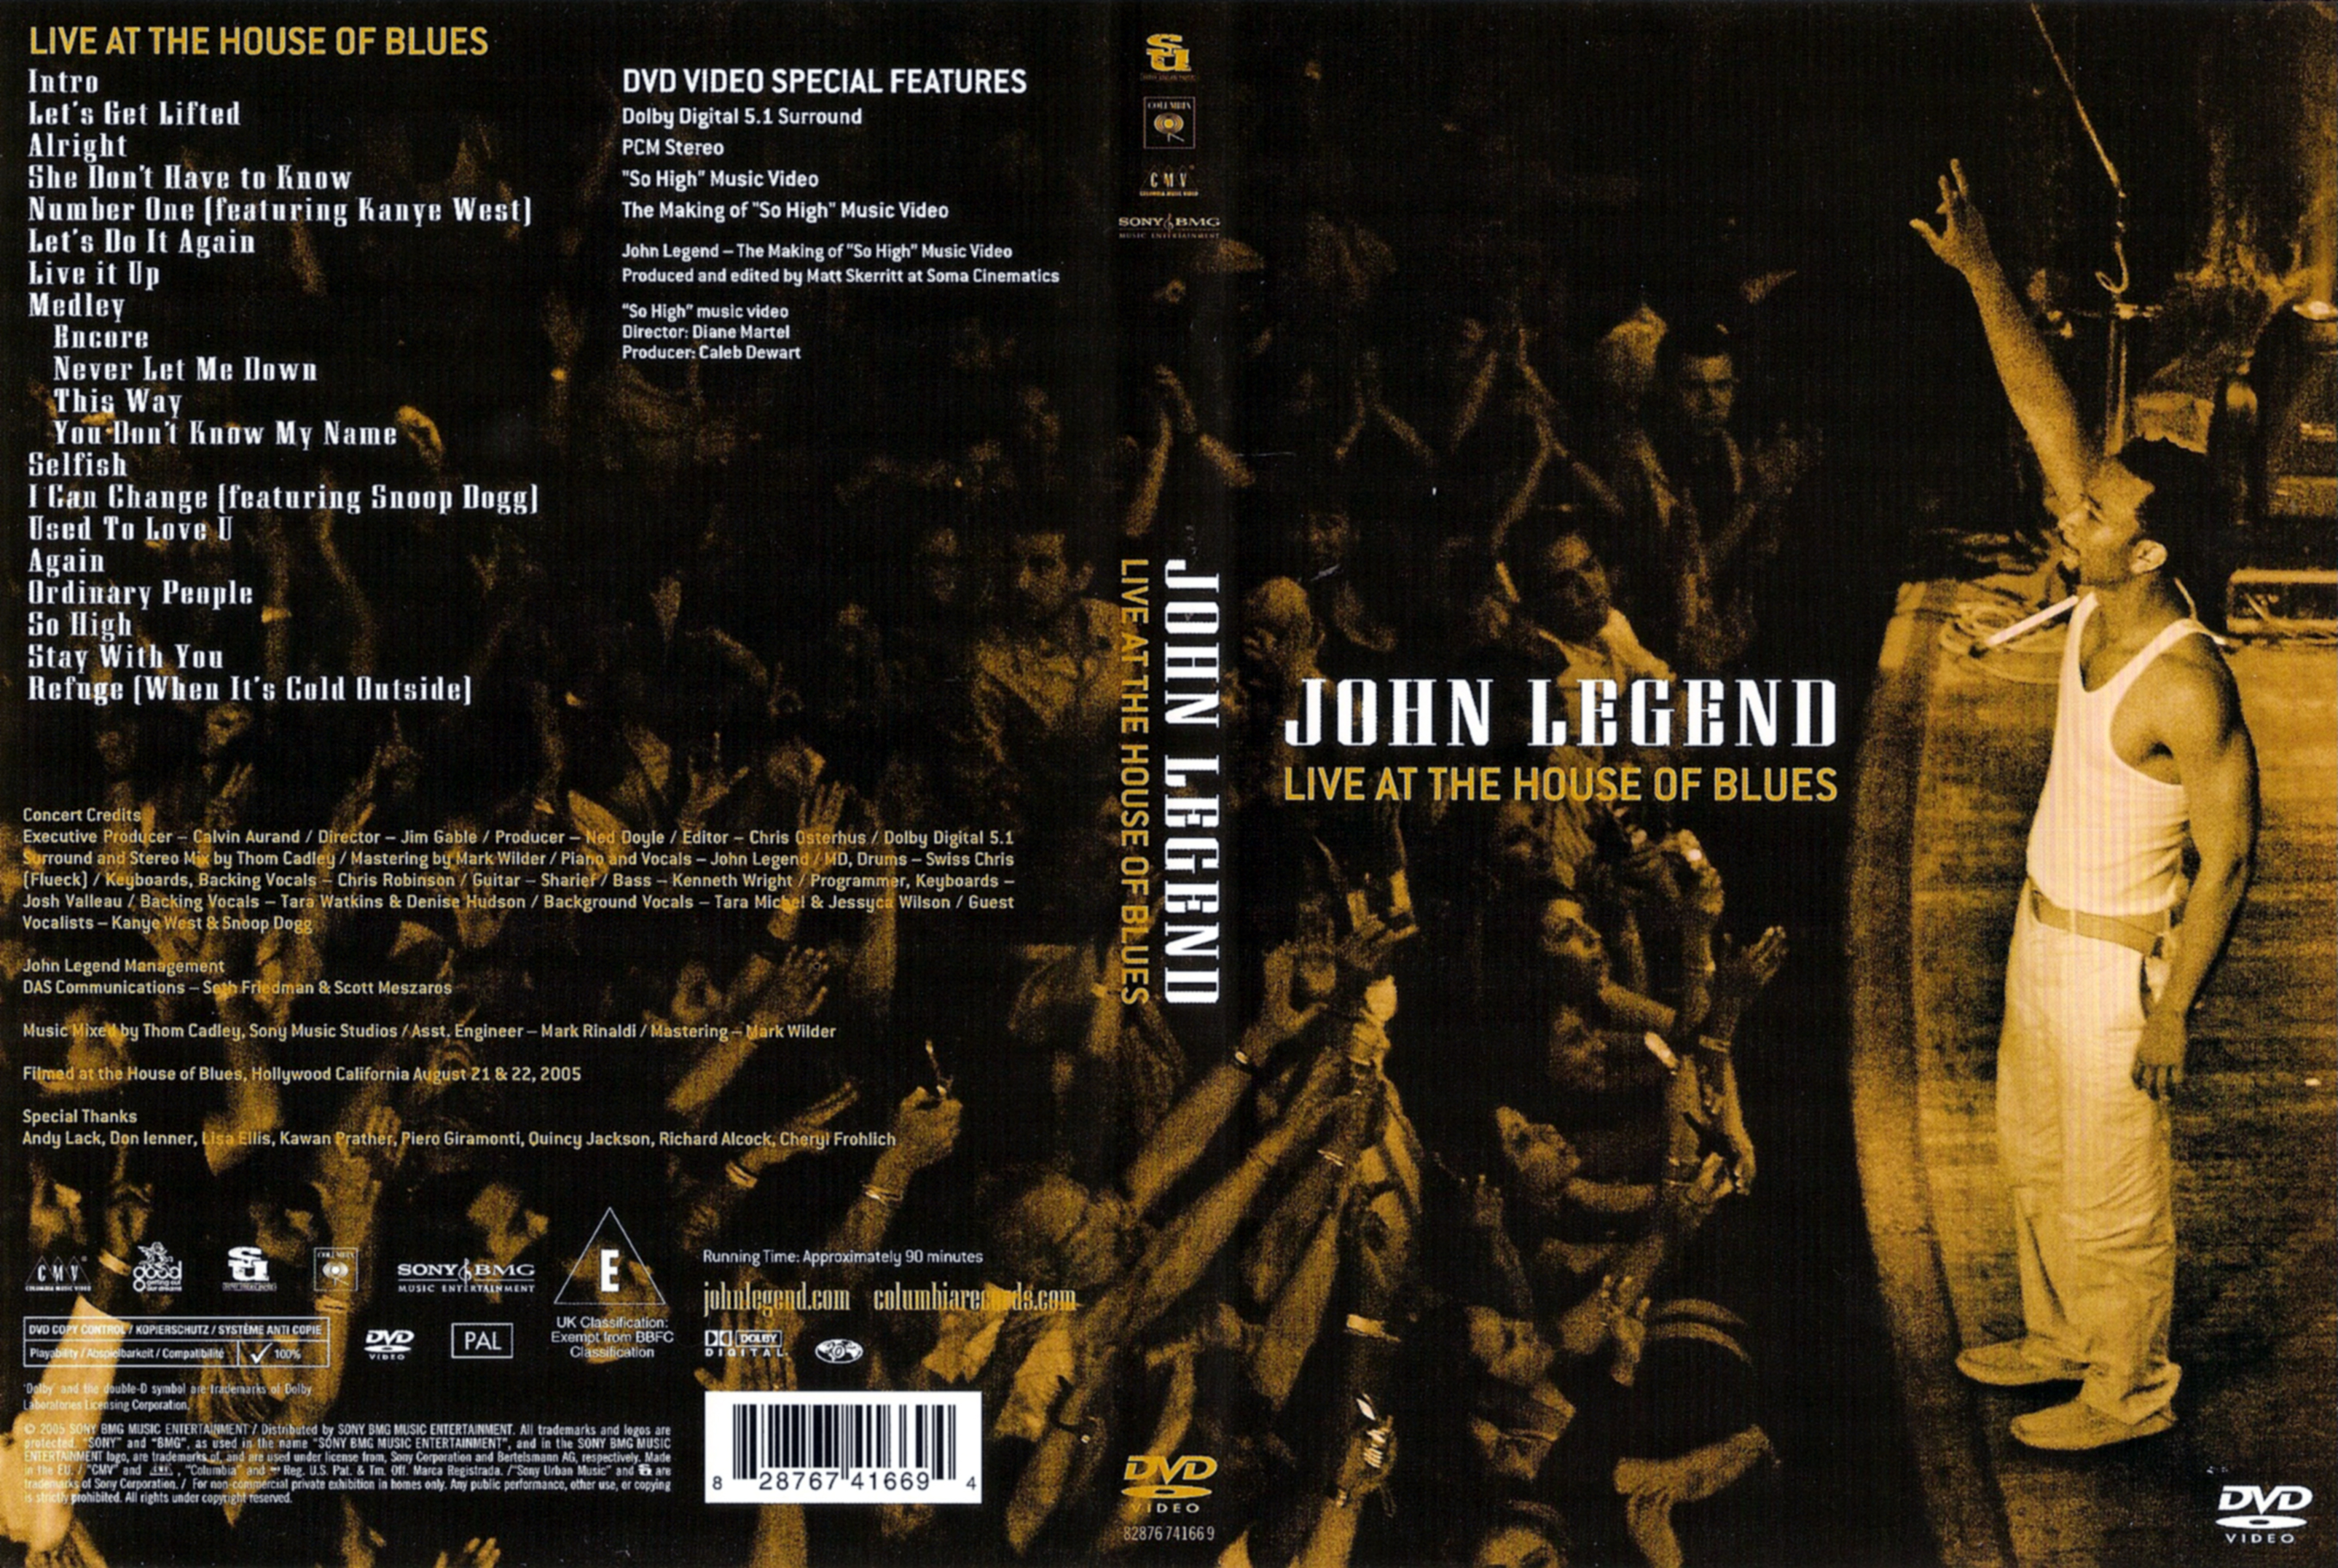 Jaquette DVD John Legend - Live at the House of Blues